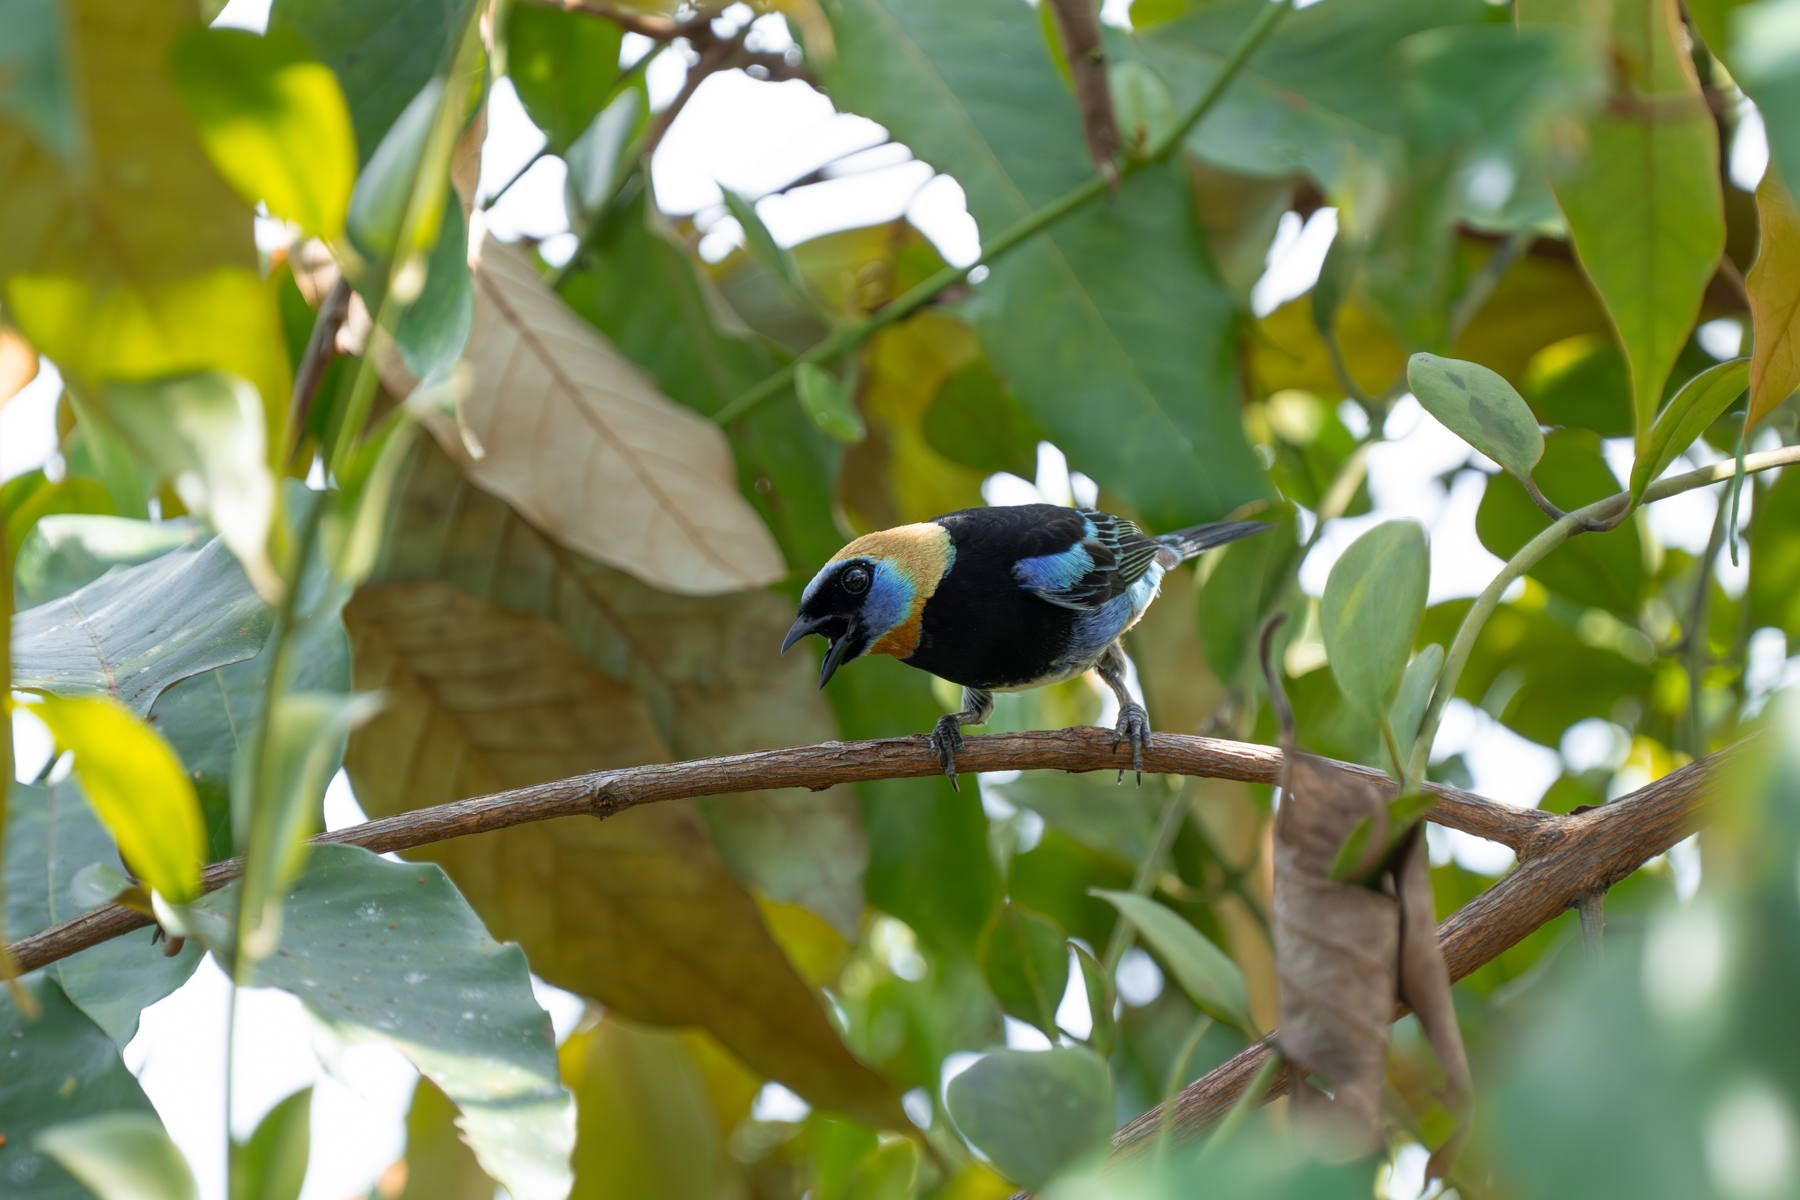 A Golden-hooded Tanager alarm calling after spotting a nearby Central American Pygmy Owl (image by Inger Vandyke)